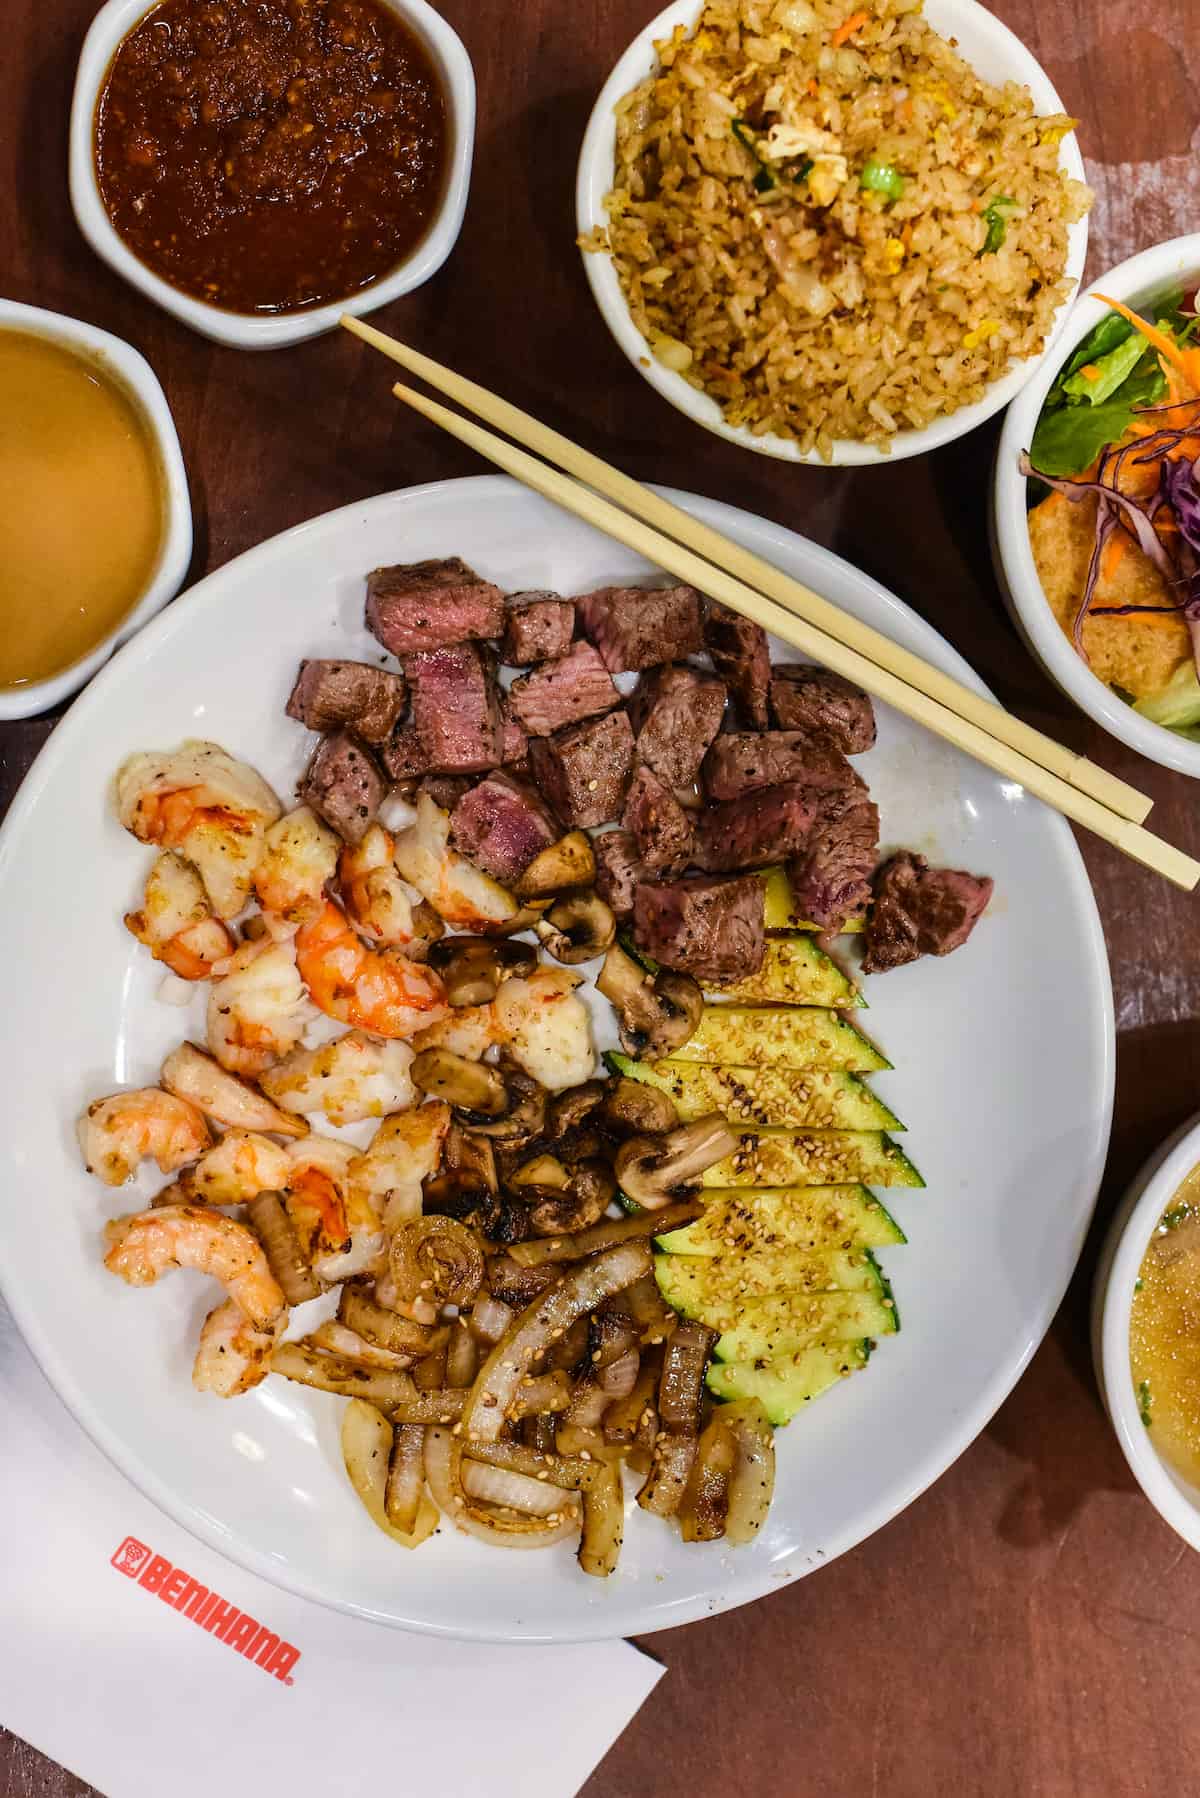 Learning the Art of Teppanyaki - Wow your friends with Benihana's "Be The Chef" program by learning how to cook on a teppan grill, and enjoy a meal of steak, shrimp and fried rice. | foxeslovelemons.com